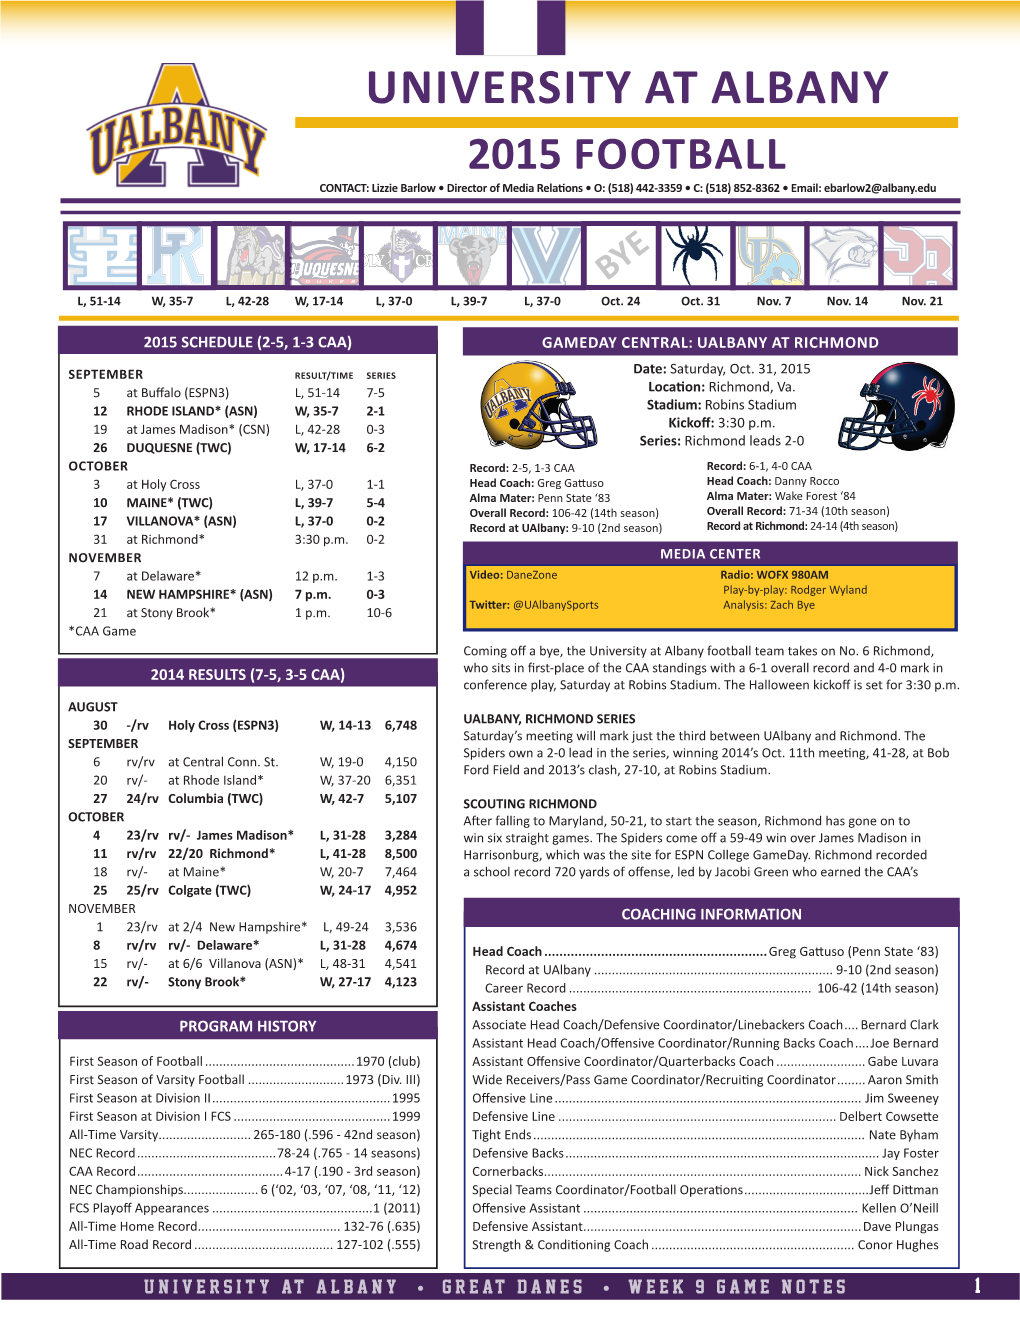 UNIVERSITY at ALBANY 2015 FOOTBALL CONTACT: Lizzie Barlow • Director of Media Relations • O: (518) 442-3359 • C: (518) 852-8362 • Email: Ebarlow2@Albany.Edu